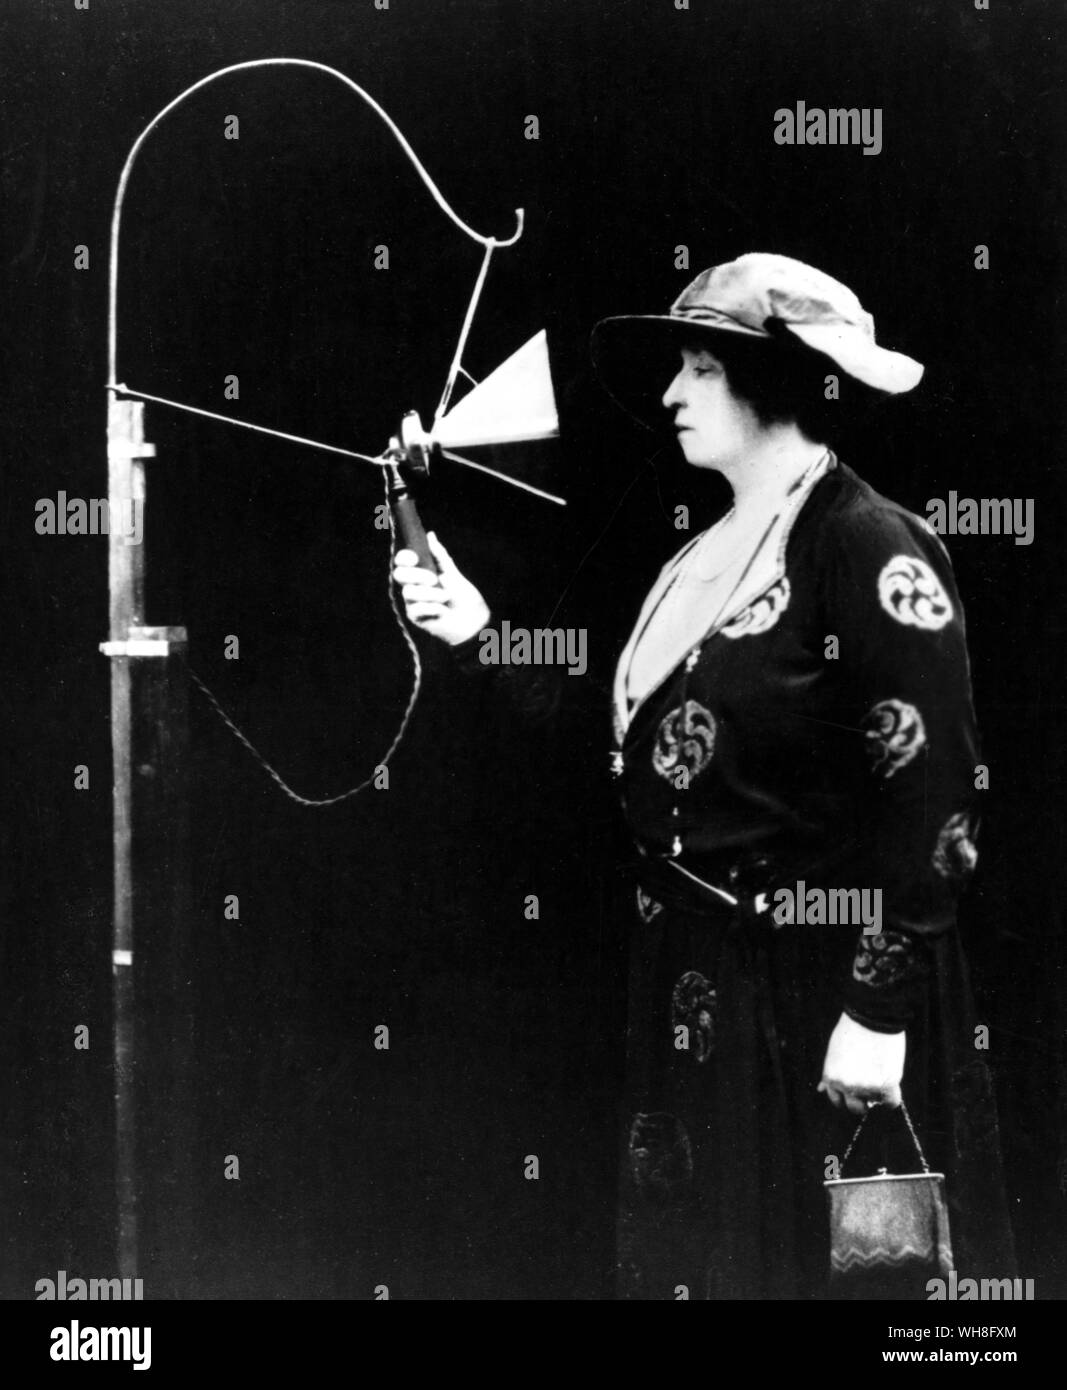 First Broadcast, Dame Nellie Melba, 19:10 on 15 June 1920, adopted name of Helen Porter Mitchell (1861-1931). Australian Soprano. She opened her recital by singing Home Sweet Home and after other popular favourites and encores, closed with the National Anthem. In the hastily adapted Marconi studio at the Chelmsford works, she used a microphone created with a telephone mouthpiece and wooden cigar-box.. . Stock Photo